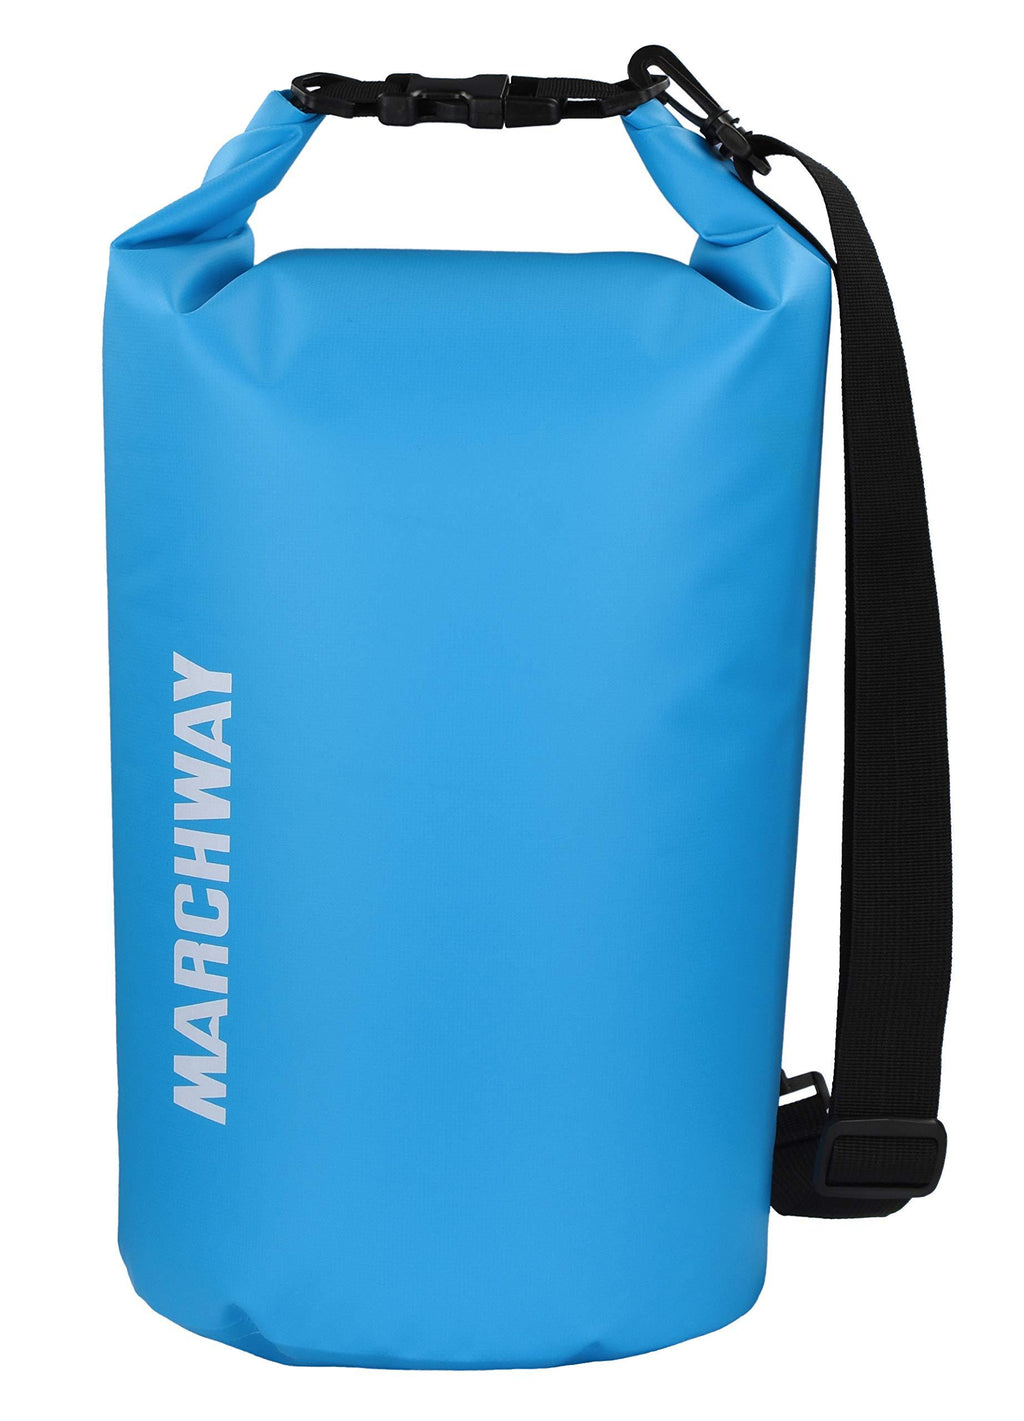 [AUSTRALIA] - MARCHWAY Floating Waterproof Dry Bag 5L/10L/20L/30L/40L, Roll Top Sack Keeps Gear Dry for Kayaking, Rafting, Boating, Swimming, Camping, Hiking, Beach, Fishing Light Blue 20L 